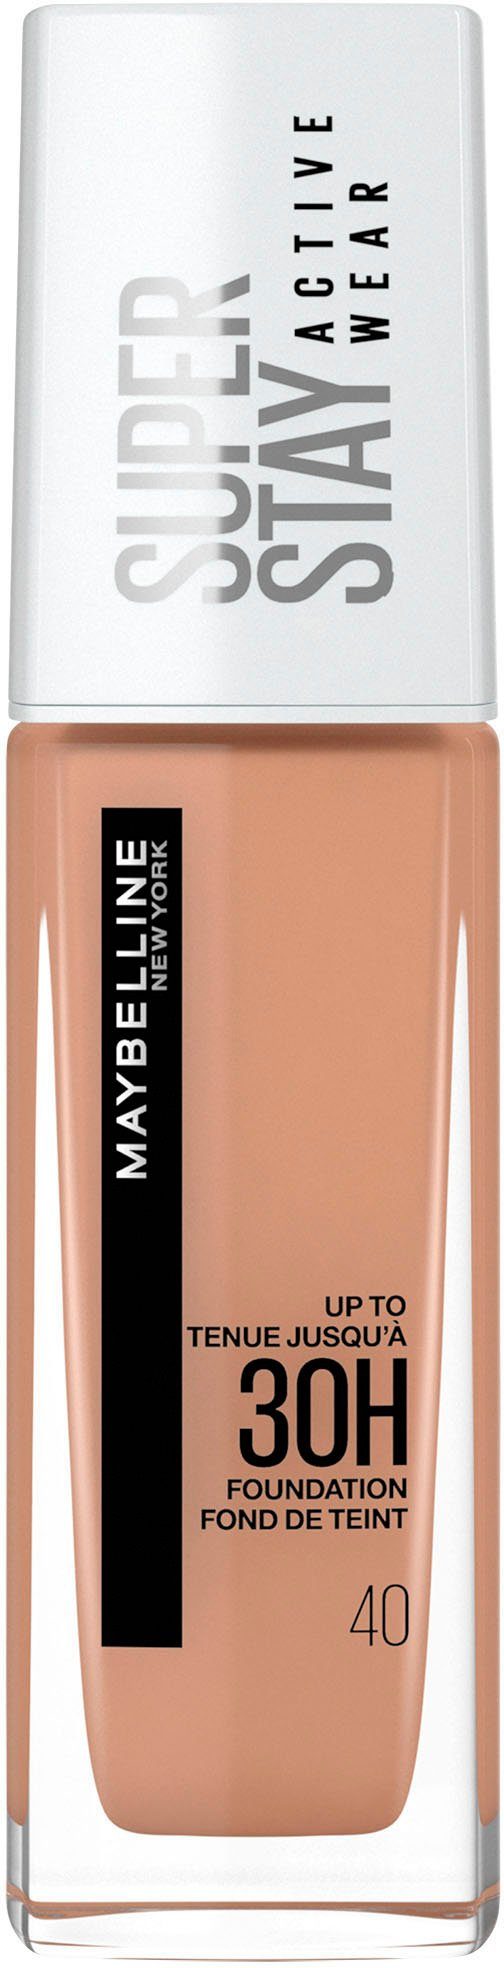 Foundation NEW Wear Super Fawn MAYBELLINE Active 40 Stay YORK